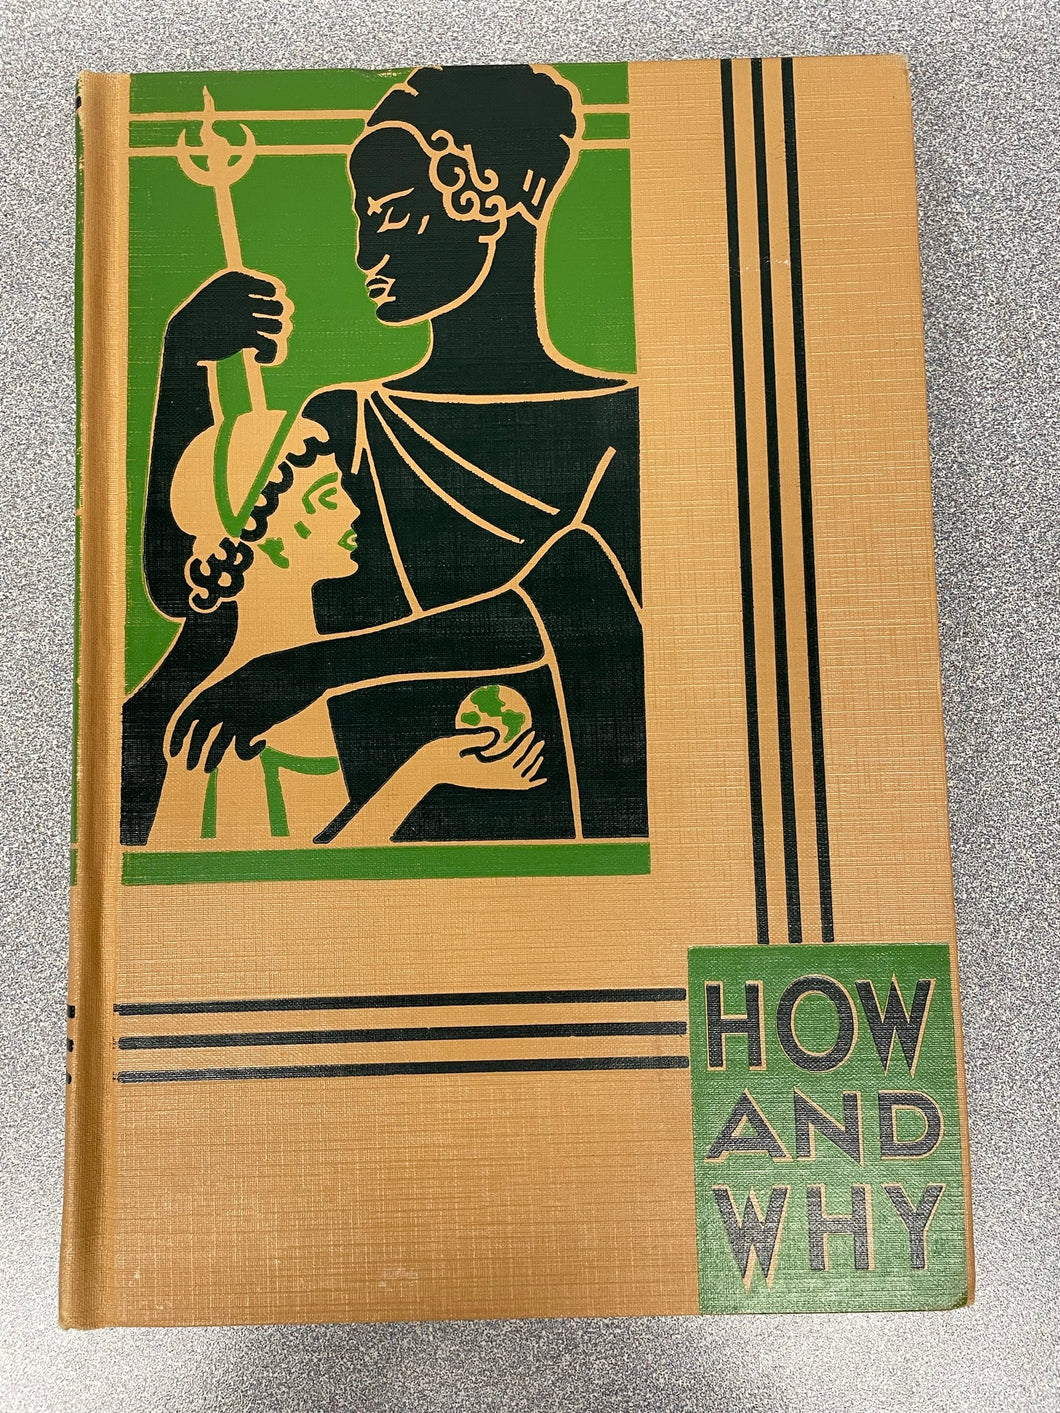 The How and Why Program: Story Unit, Diemer, George W. ed. [1950] CN 5/23